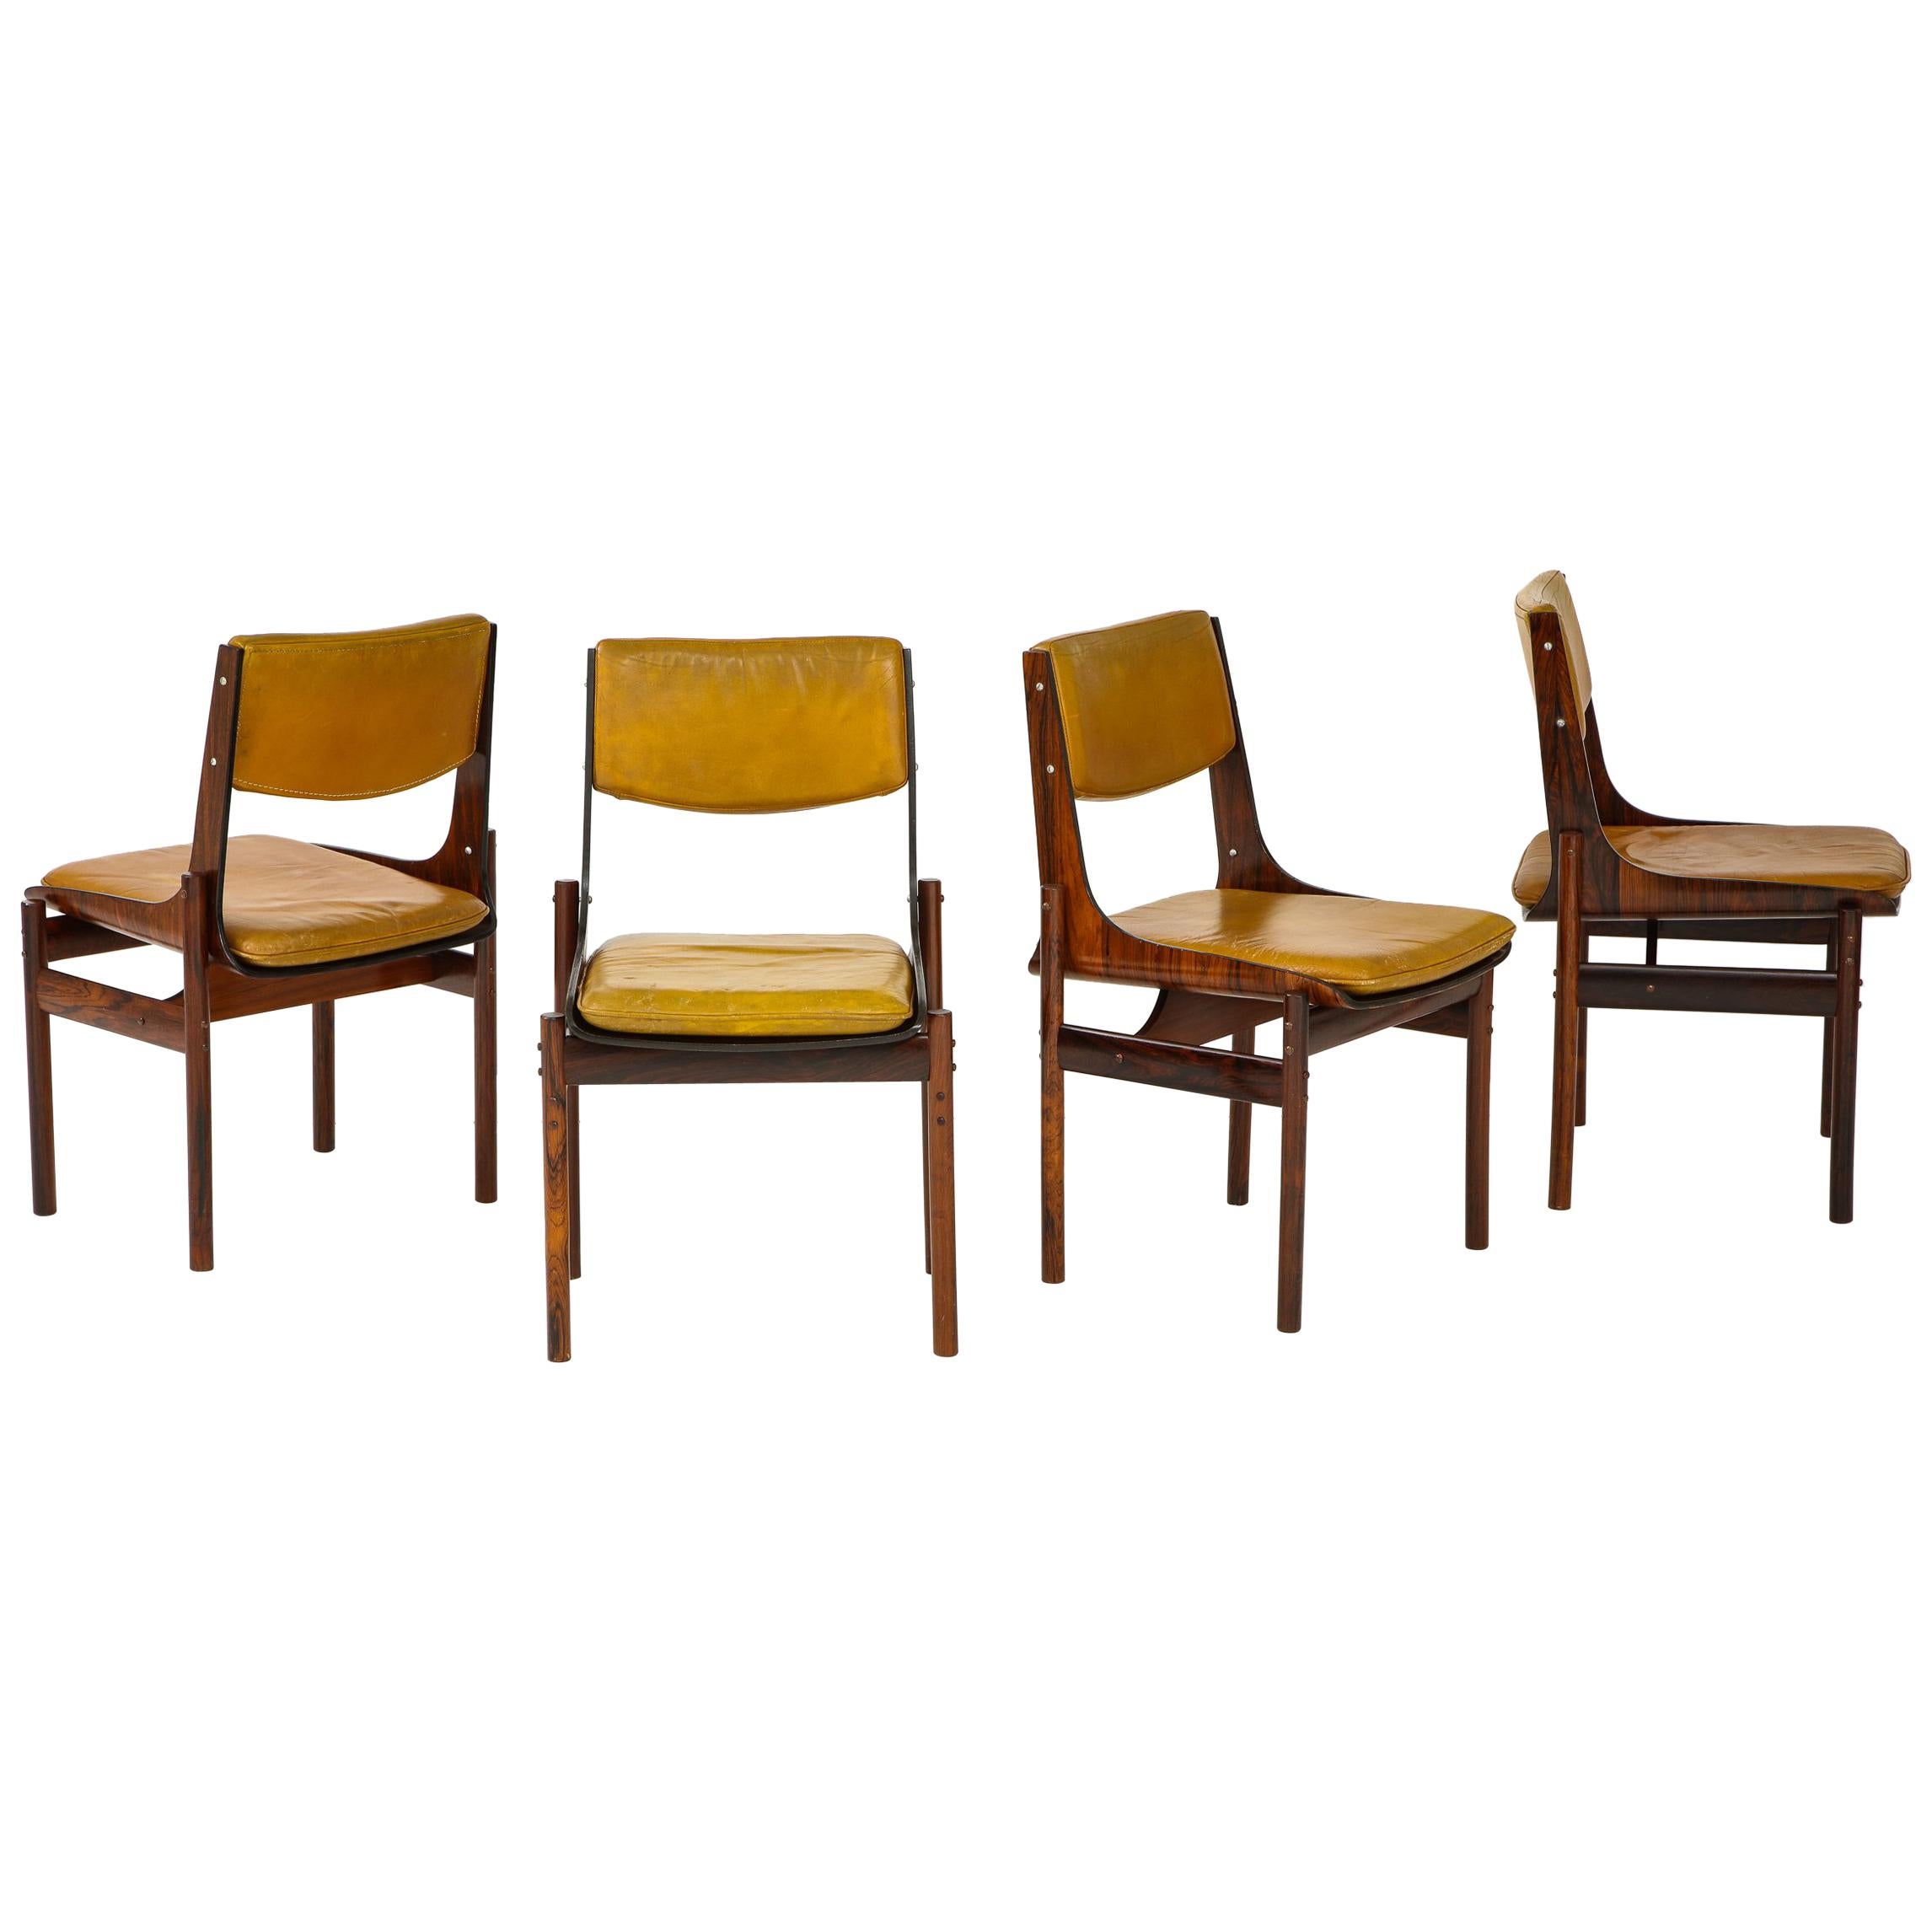 Seat of Four Jacaranda and Leather Chairs from Brazil